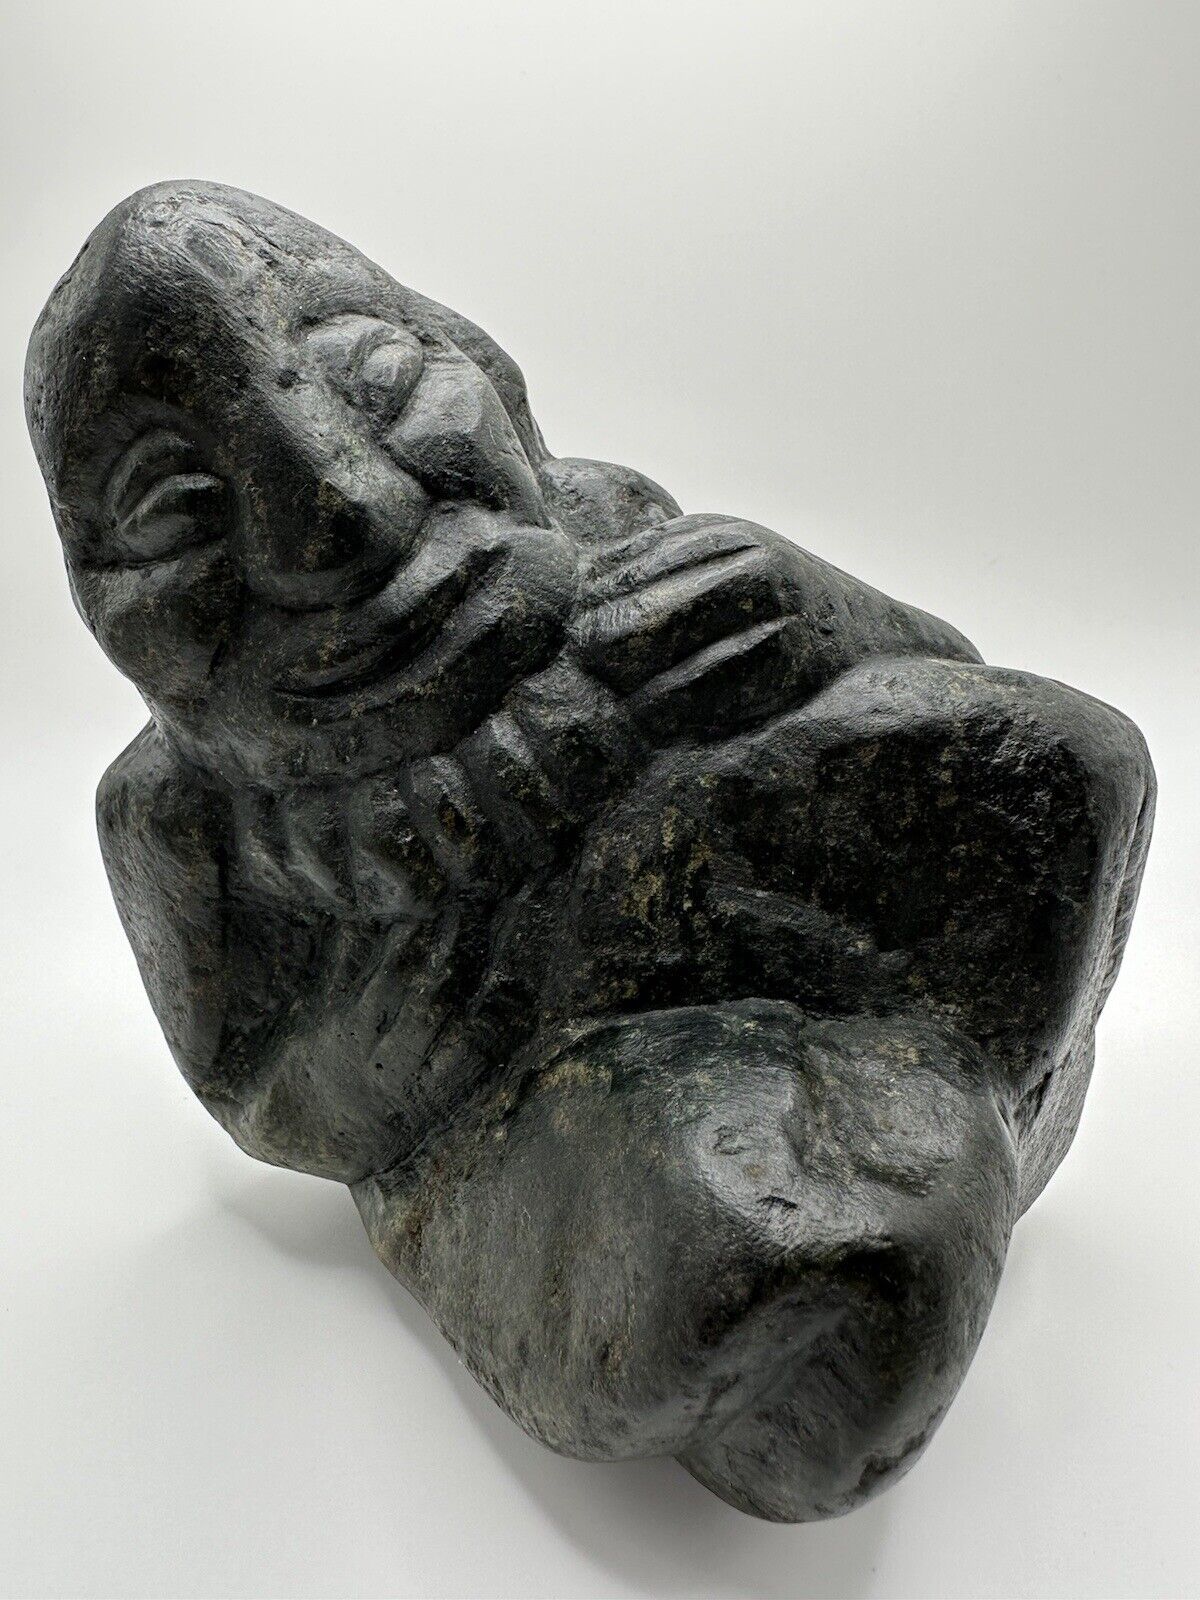 Very Old Antique Inuit Soapstone Carving Human Figure 6 Inches